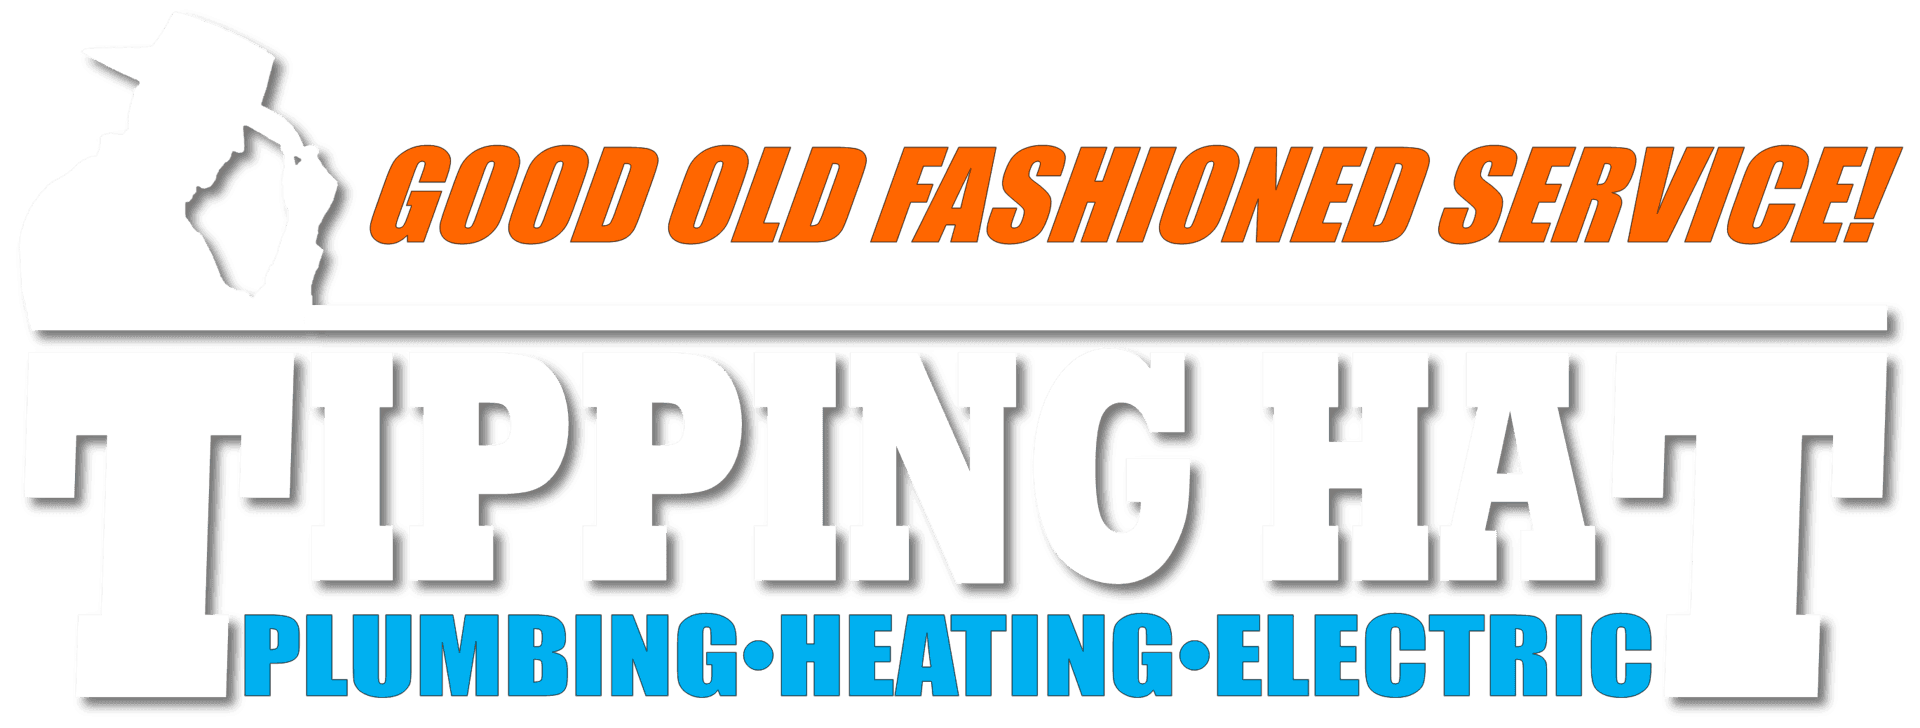 Tipping Hat Plumbing, Heating and Electric Logo